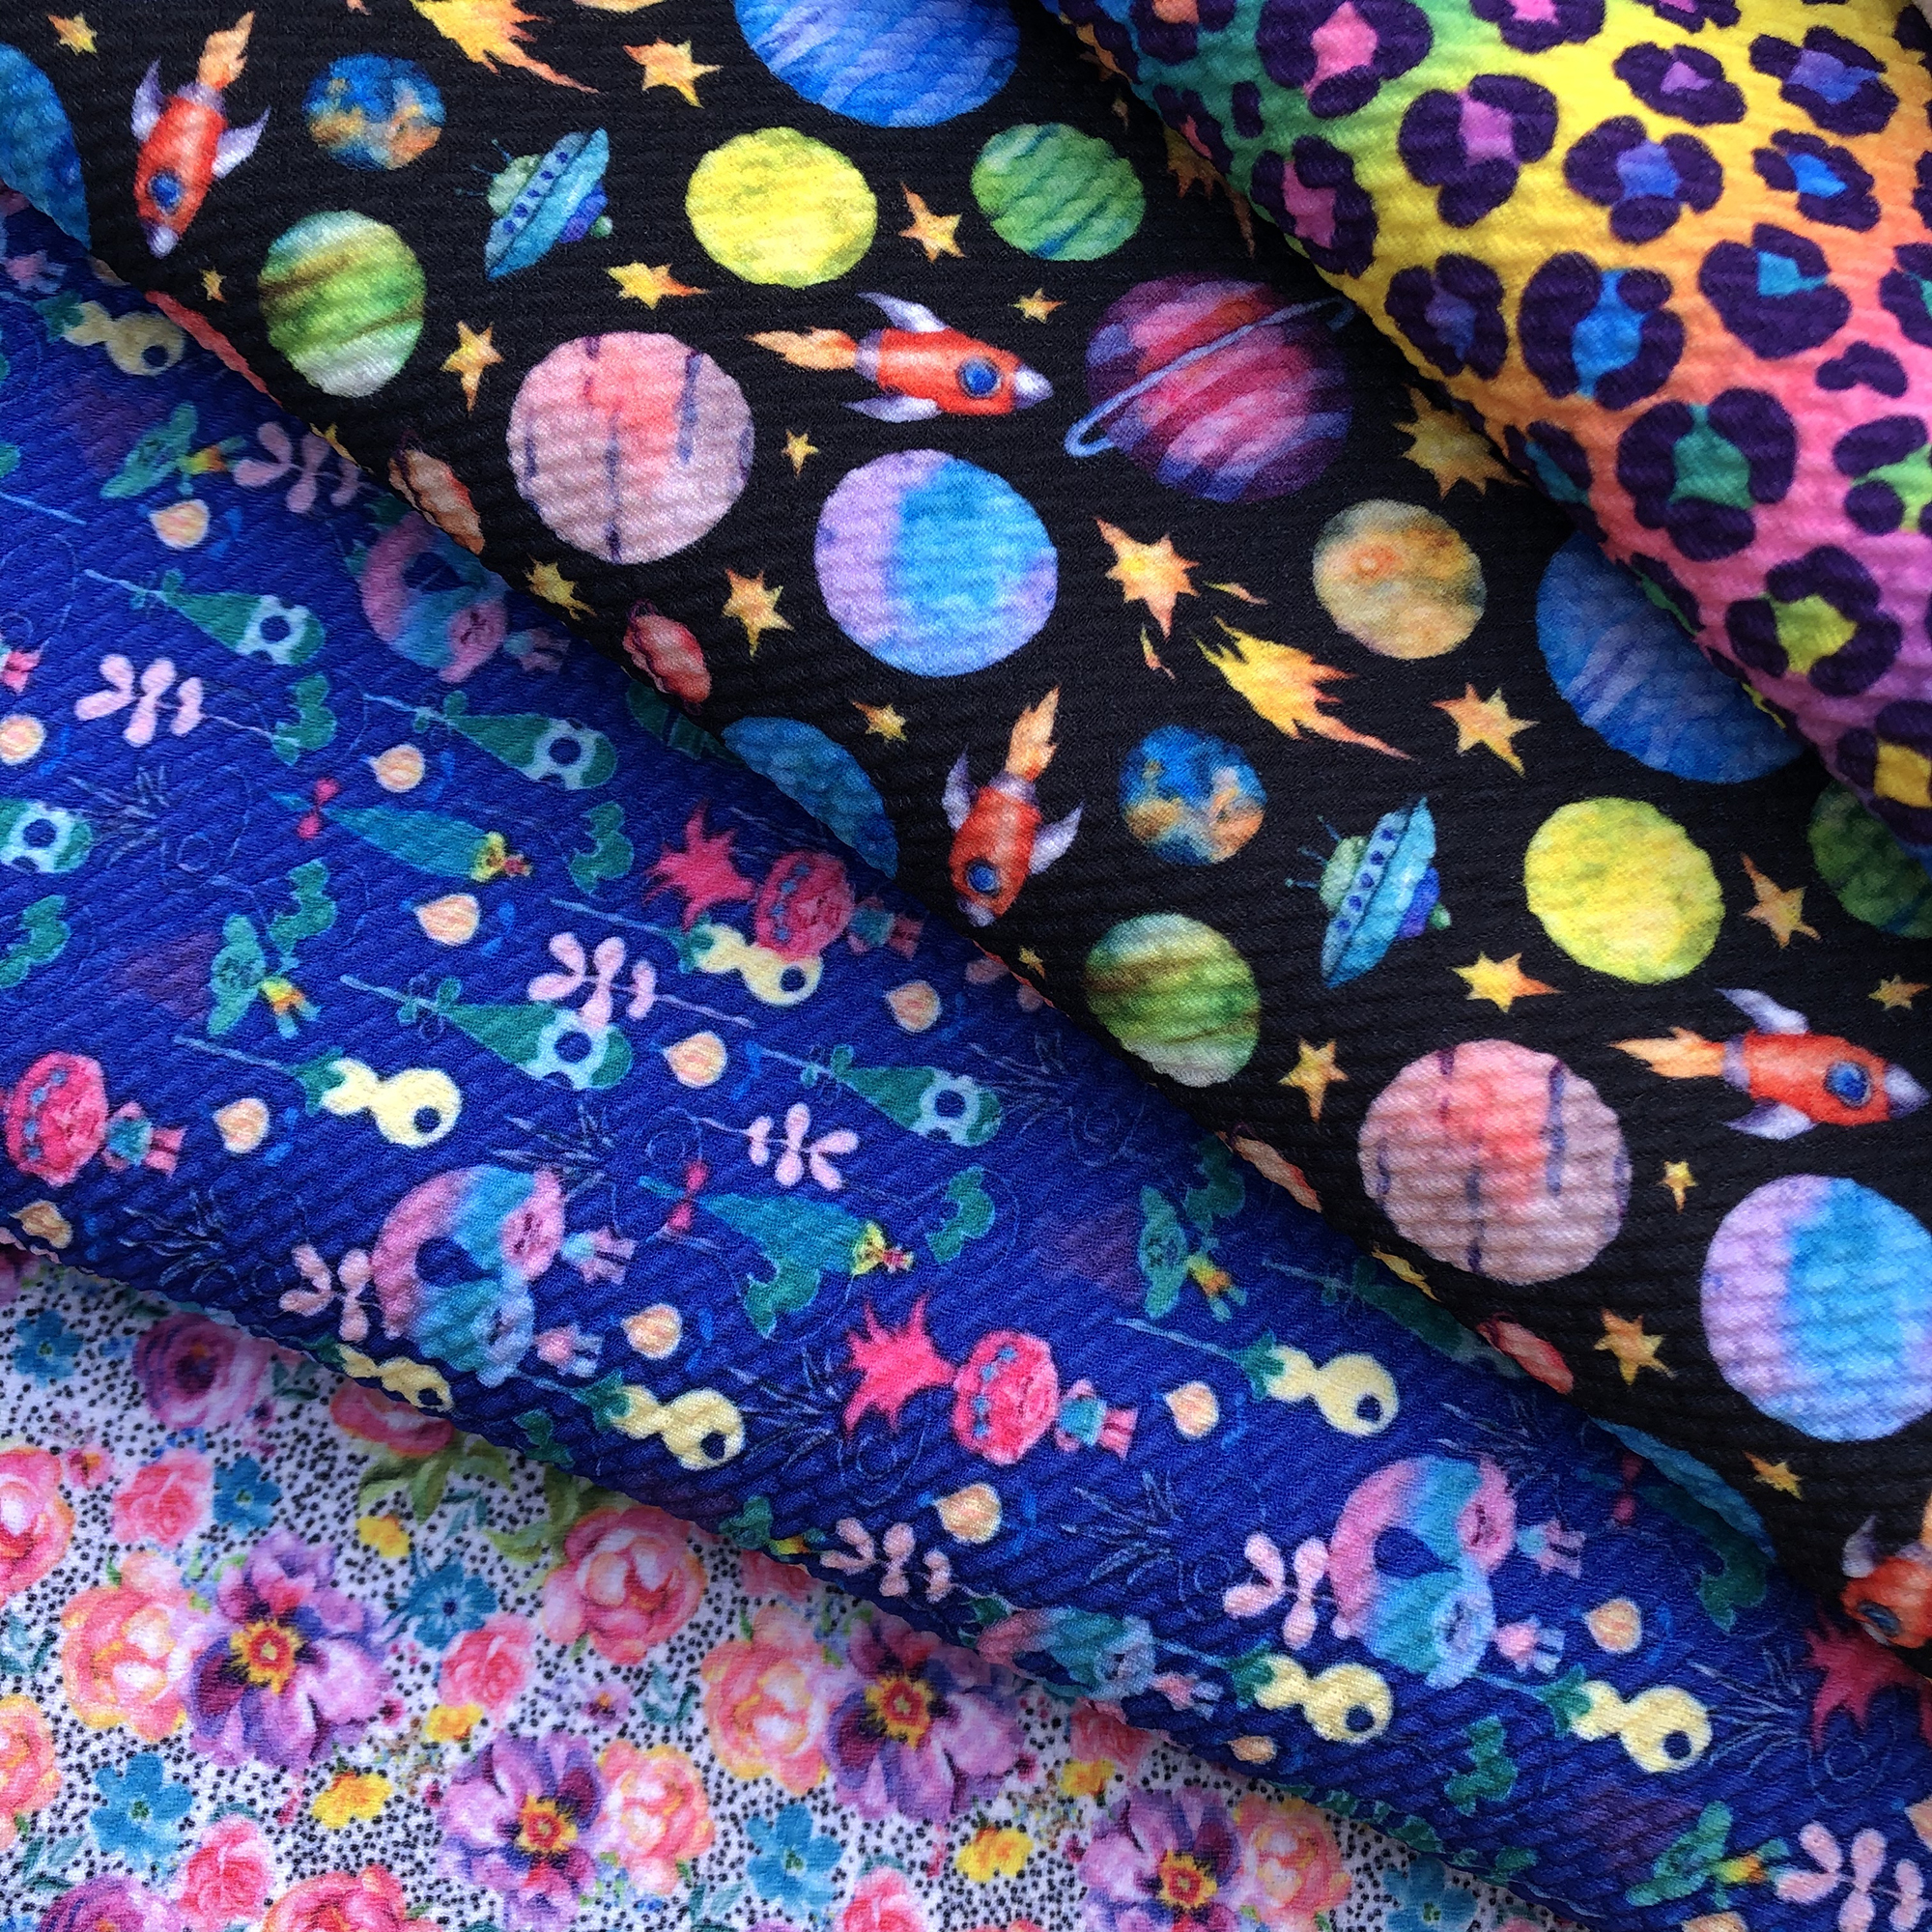 Patchwork Printed Bullet Textured Liverpool Fabric for Tissue Kids Sewing Quilting Fabrics Needlework Material,c13671